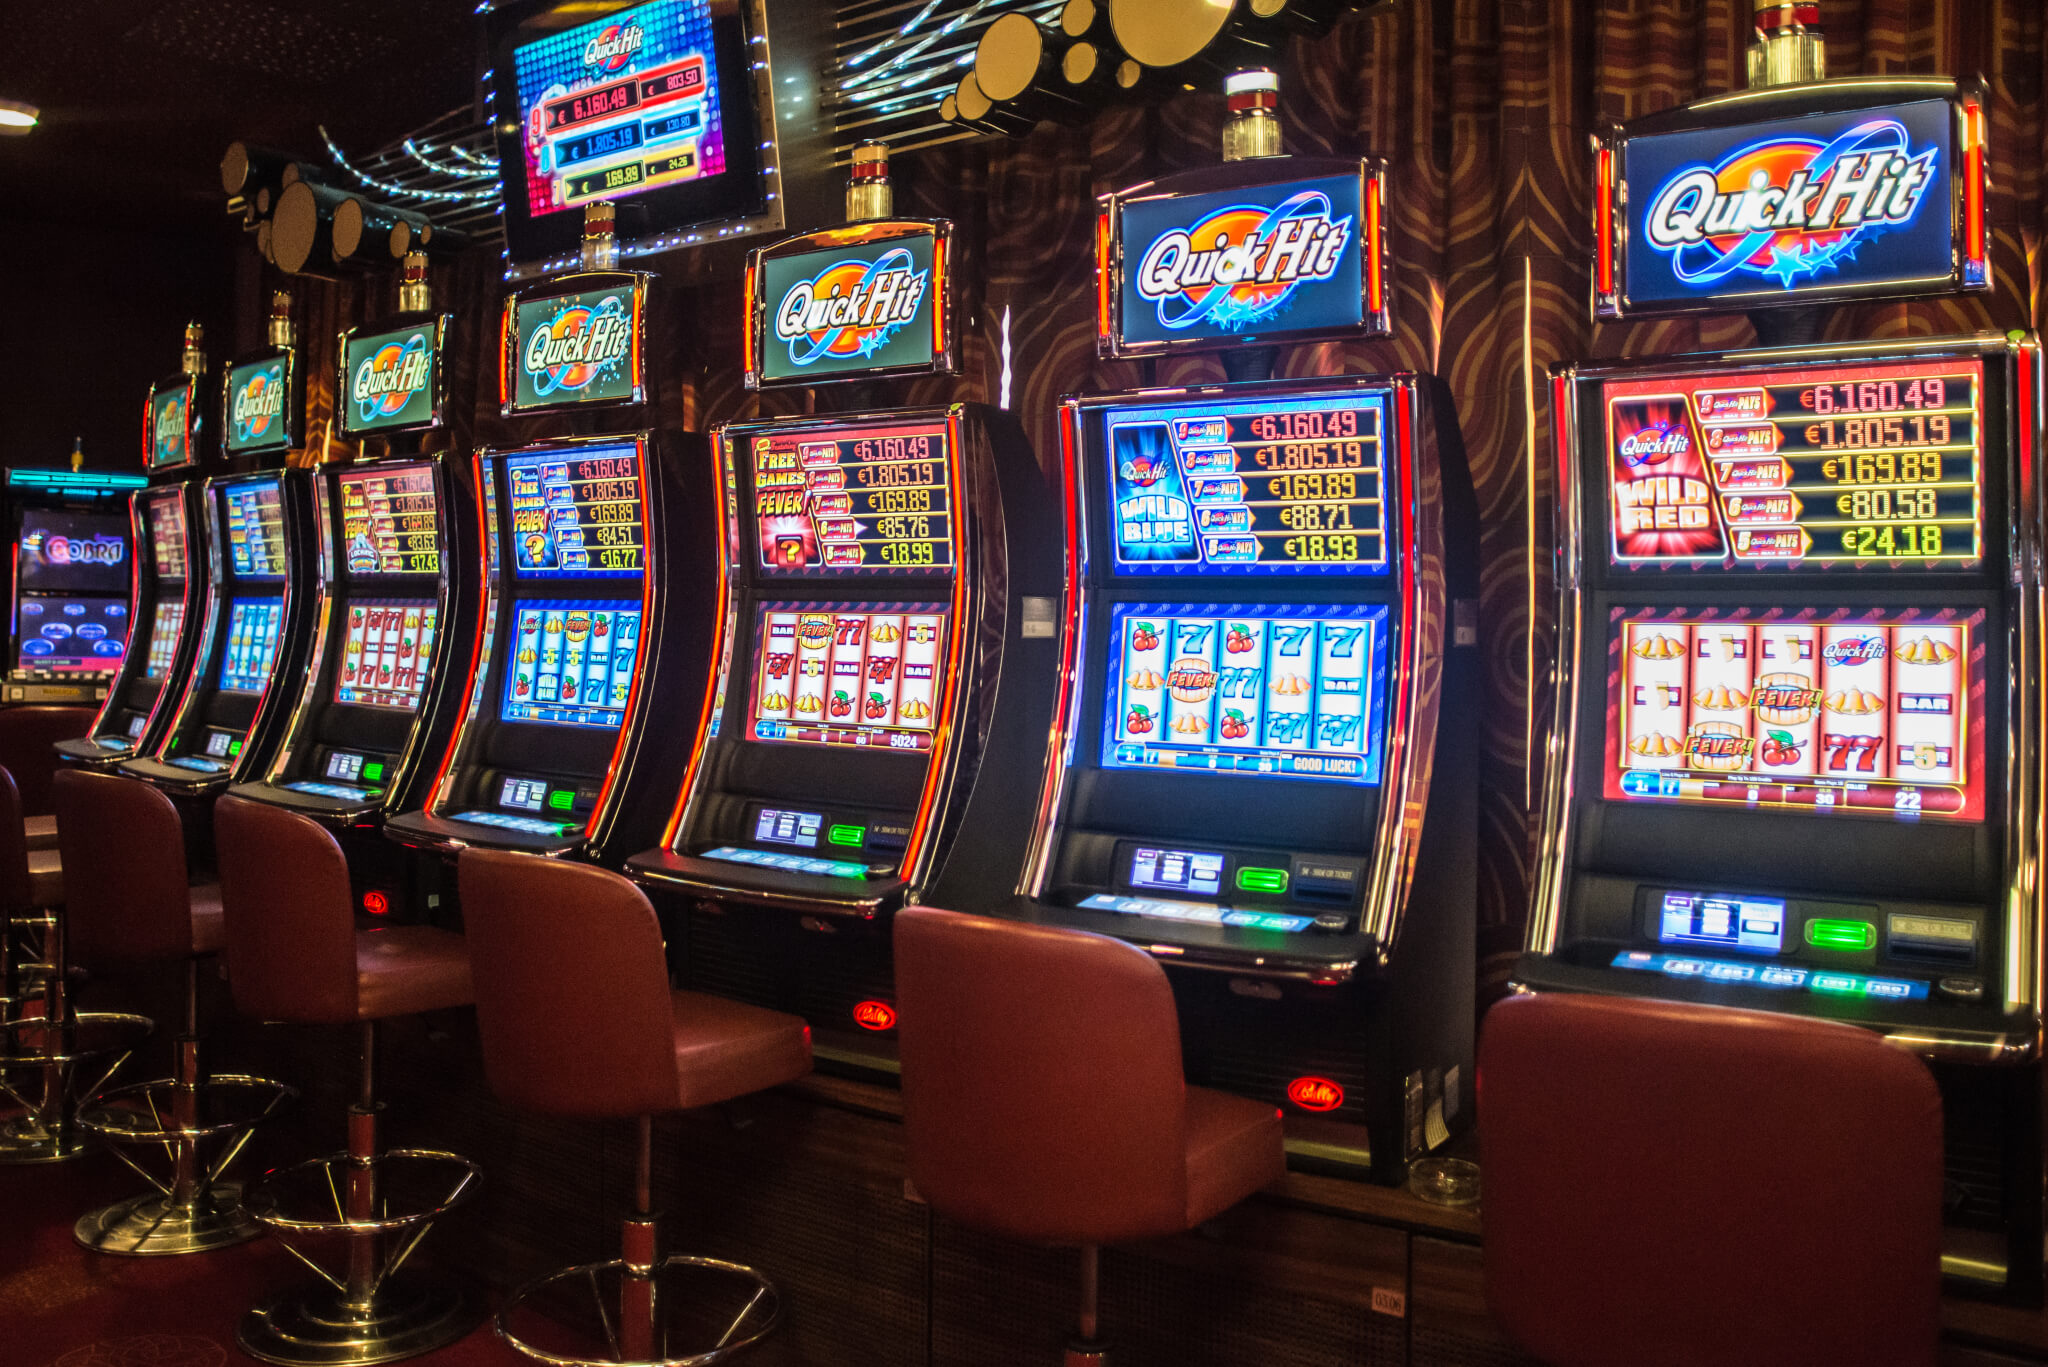 Best New Slot Sites In The UK